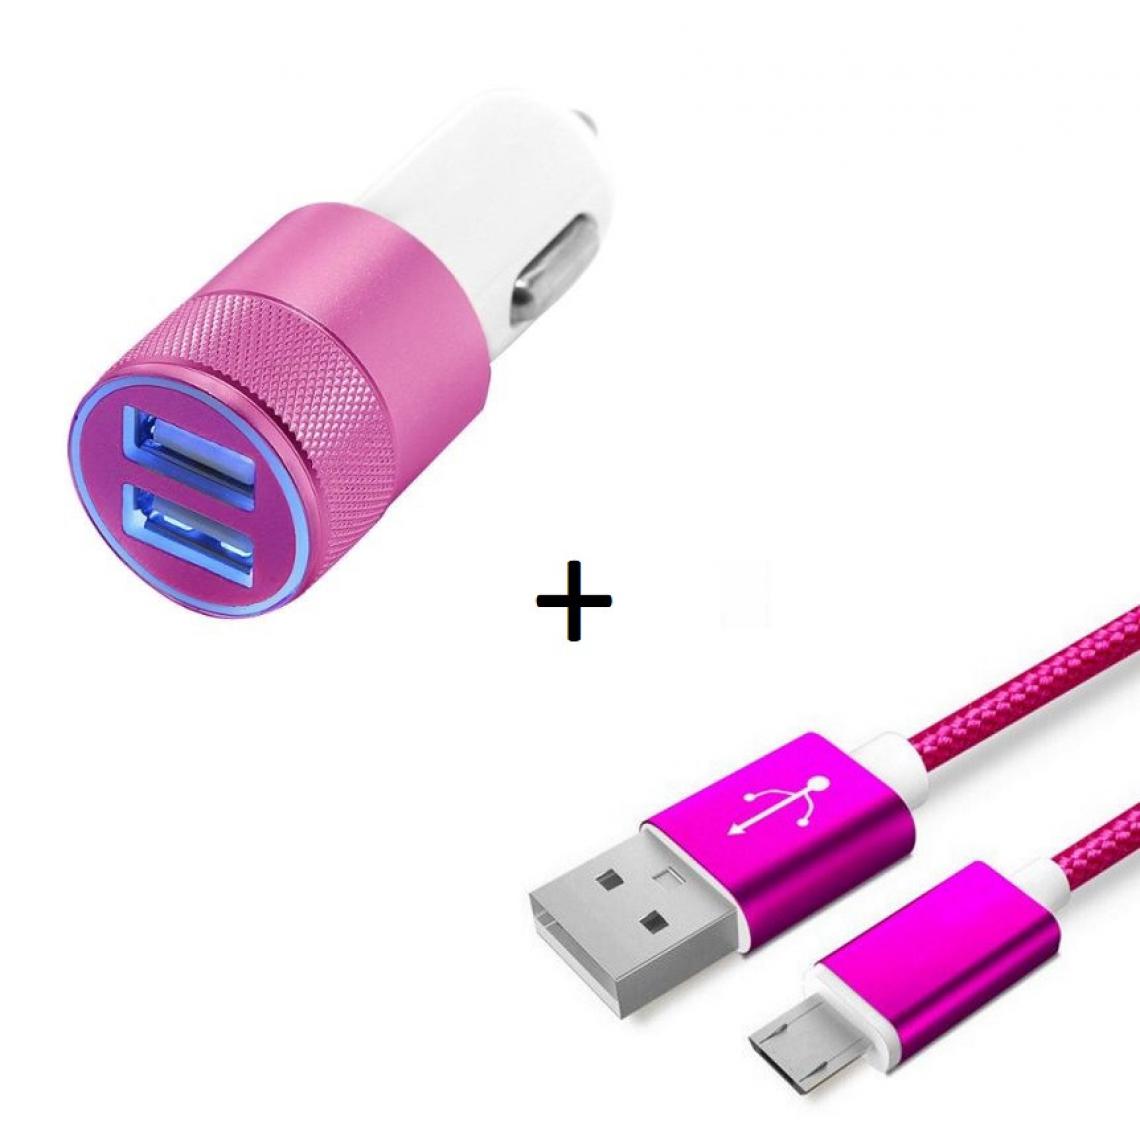 Shot - Pack Chargeur Voiture pour HUAWEI Y6 2019 Smartphone Micro USB (Cable Metal Nylon + Double Adaptateur Allume Cigare) (ROSE) - Chargeur Voiture 12V